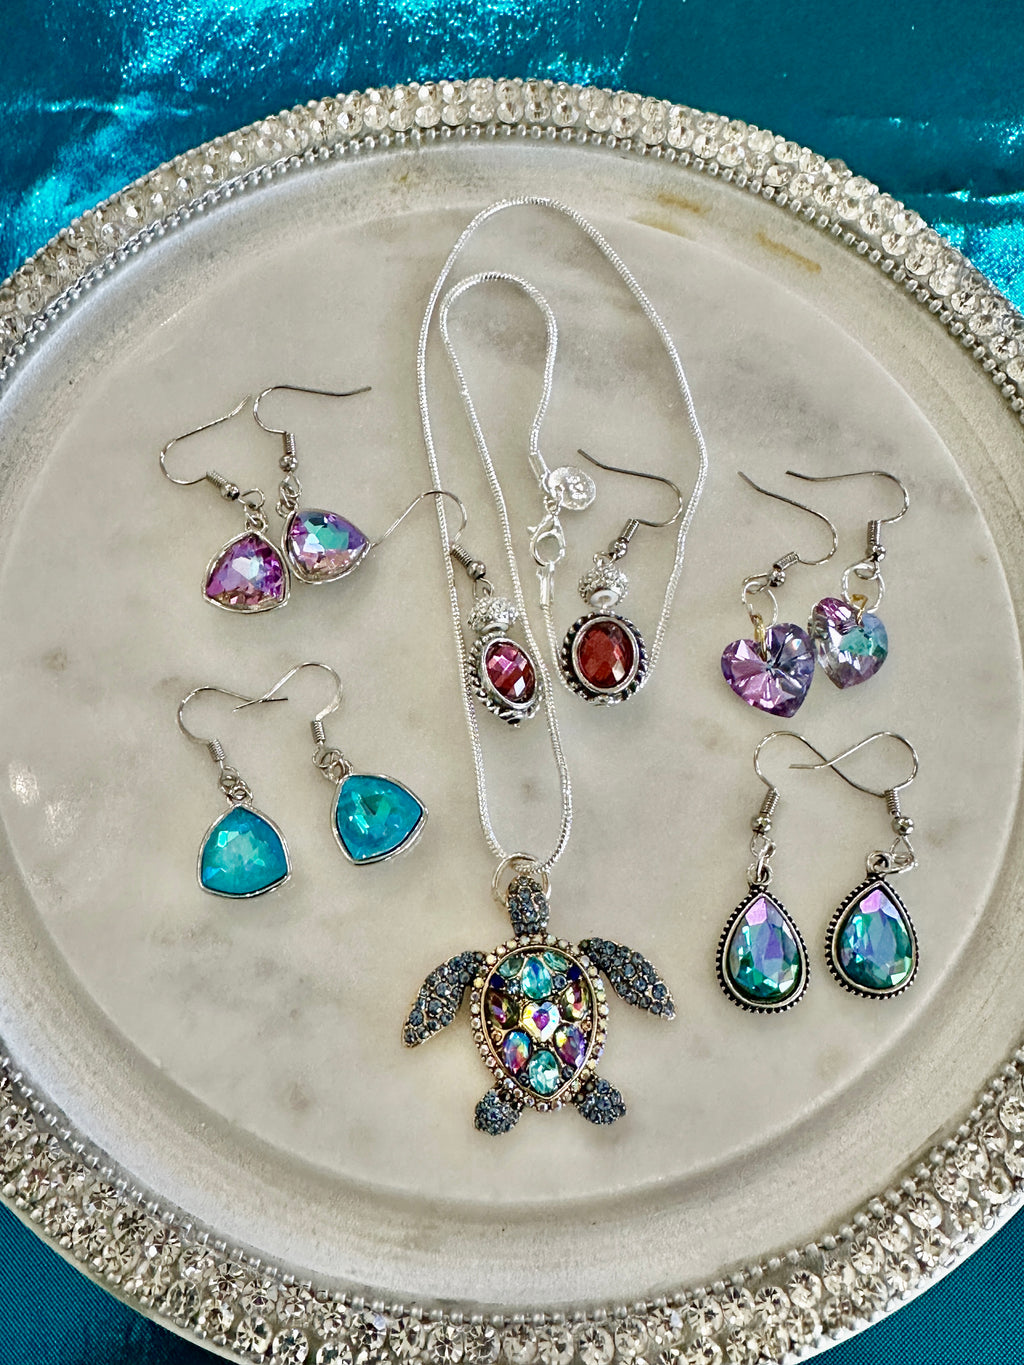 Rhinestone Sea Turtle Pendent Necklace & Choice of 5 Pairs of Earrings